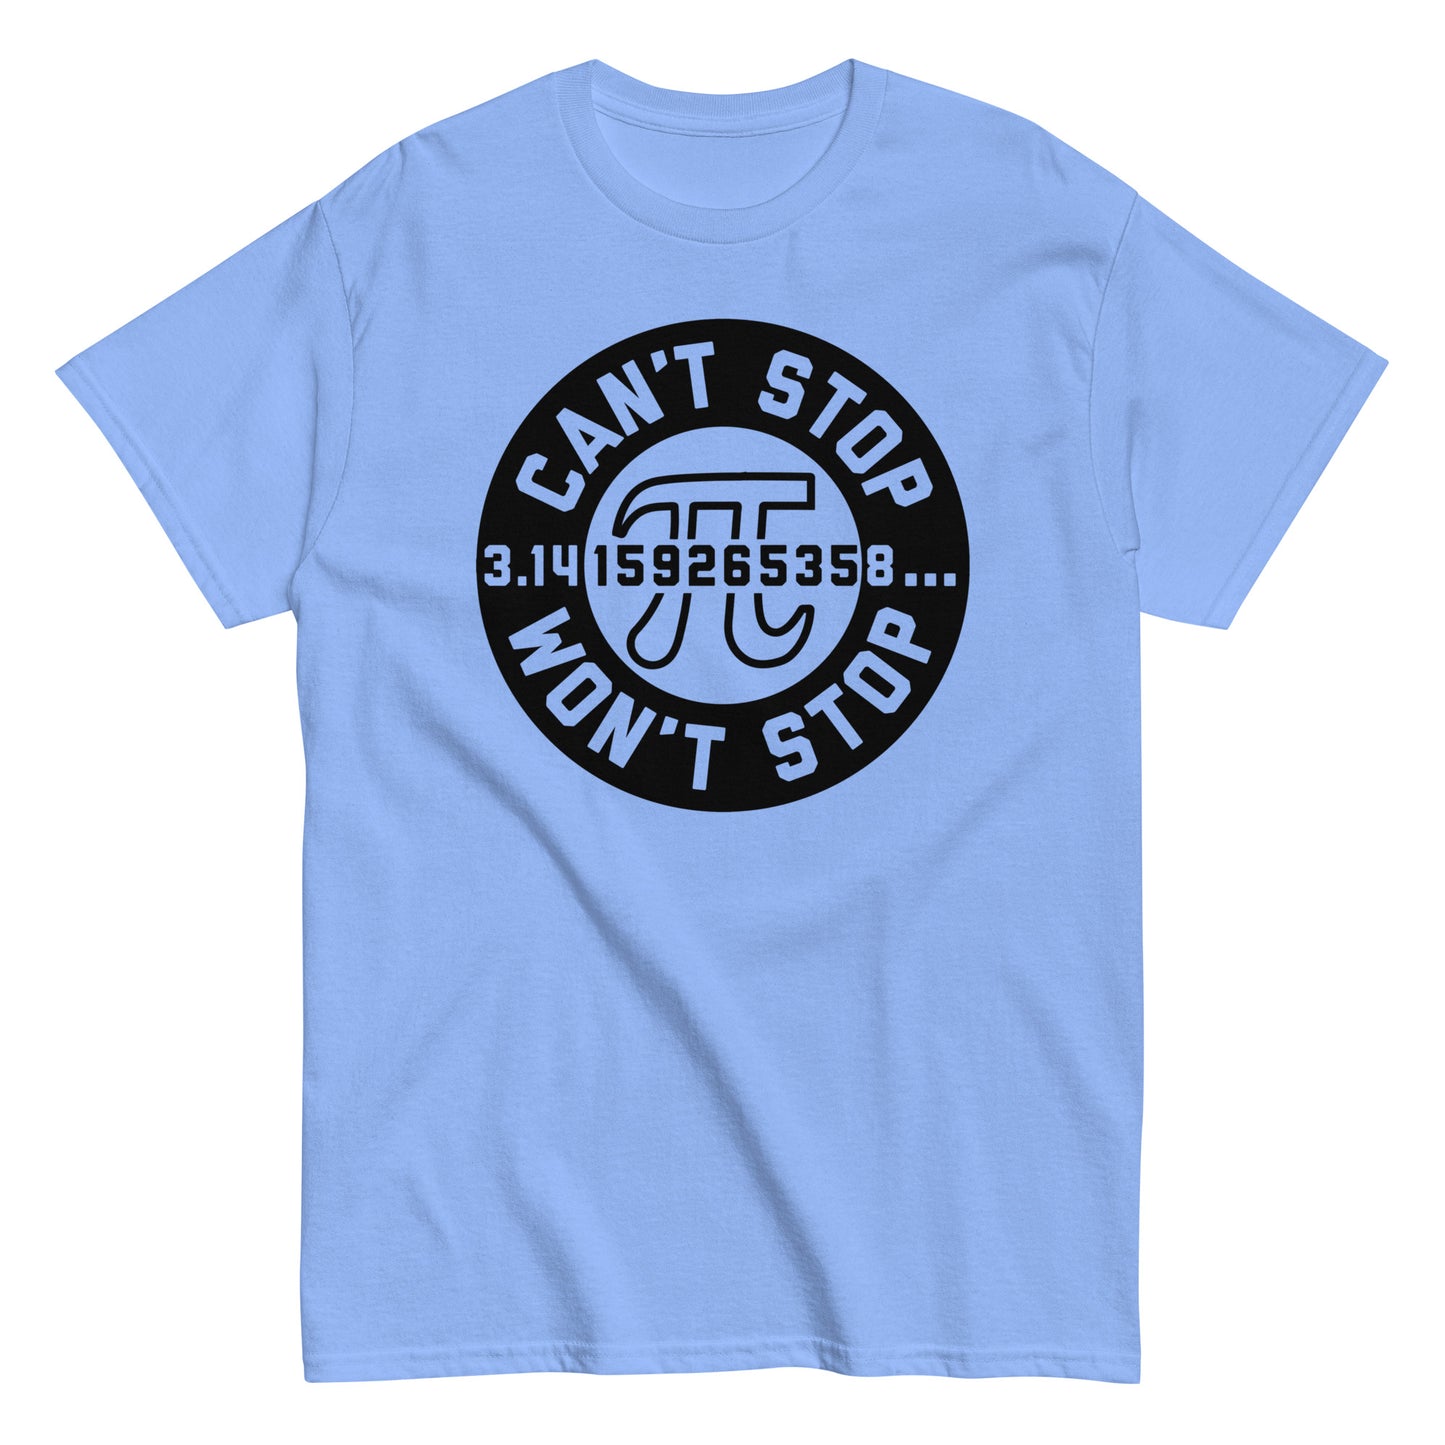 Can't Stop Won't Stop Men's Classic Tee